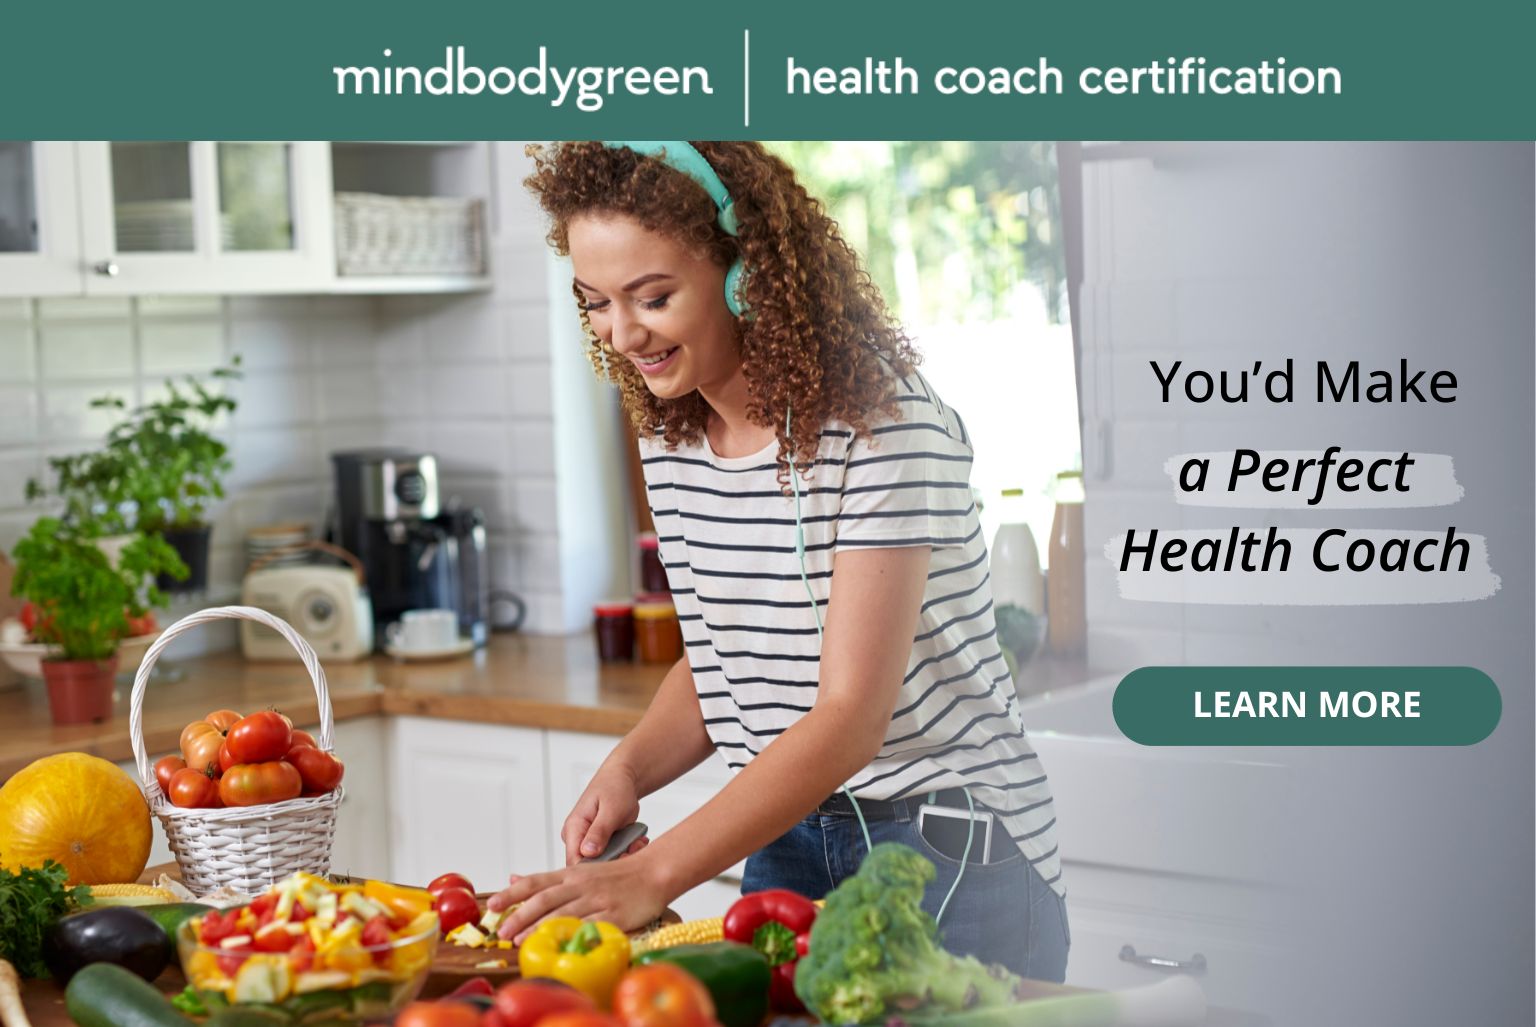 Click here to find out more about the MindBodyGreen Health Coach Certification